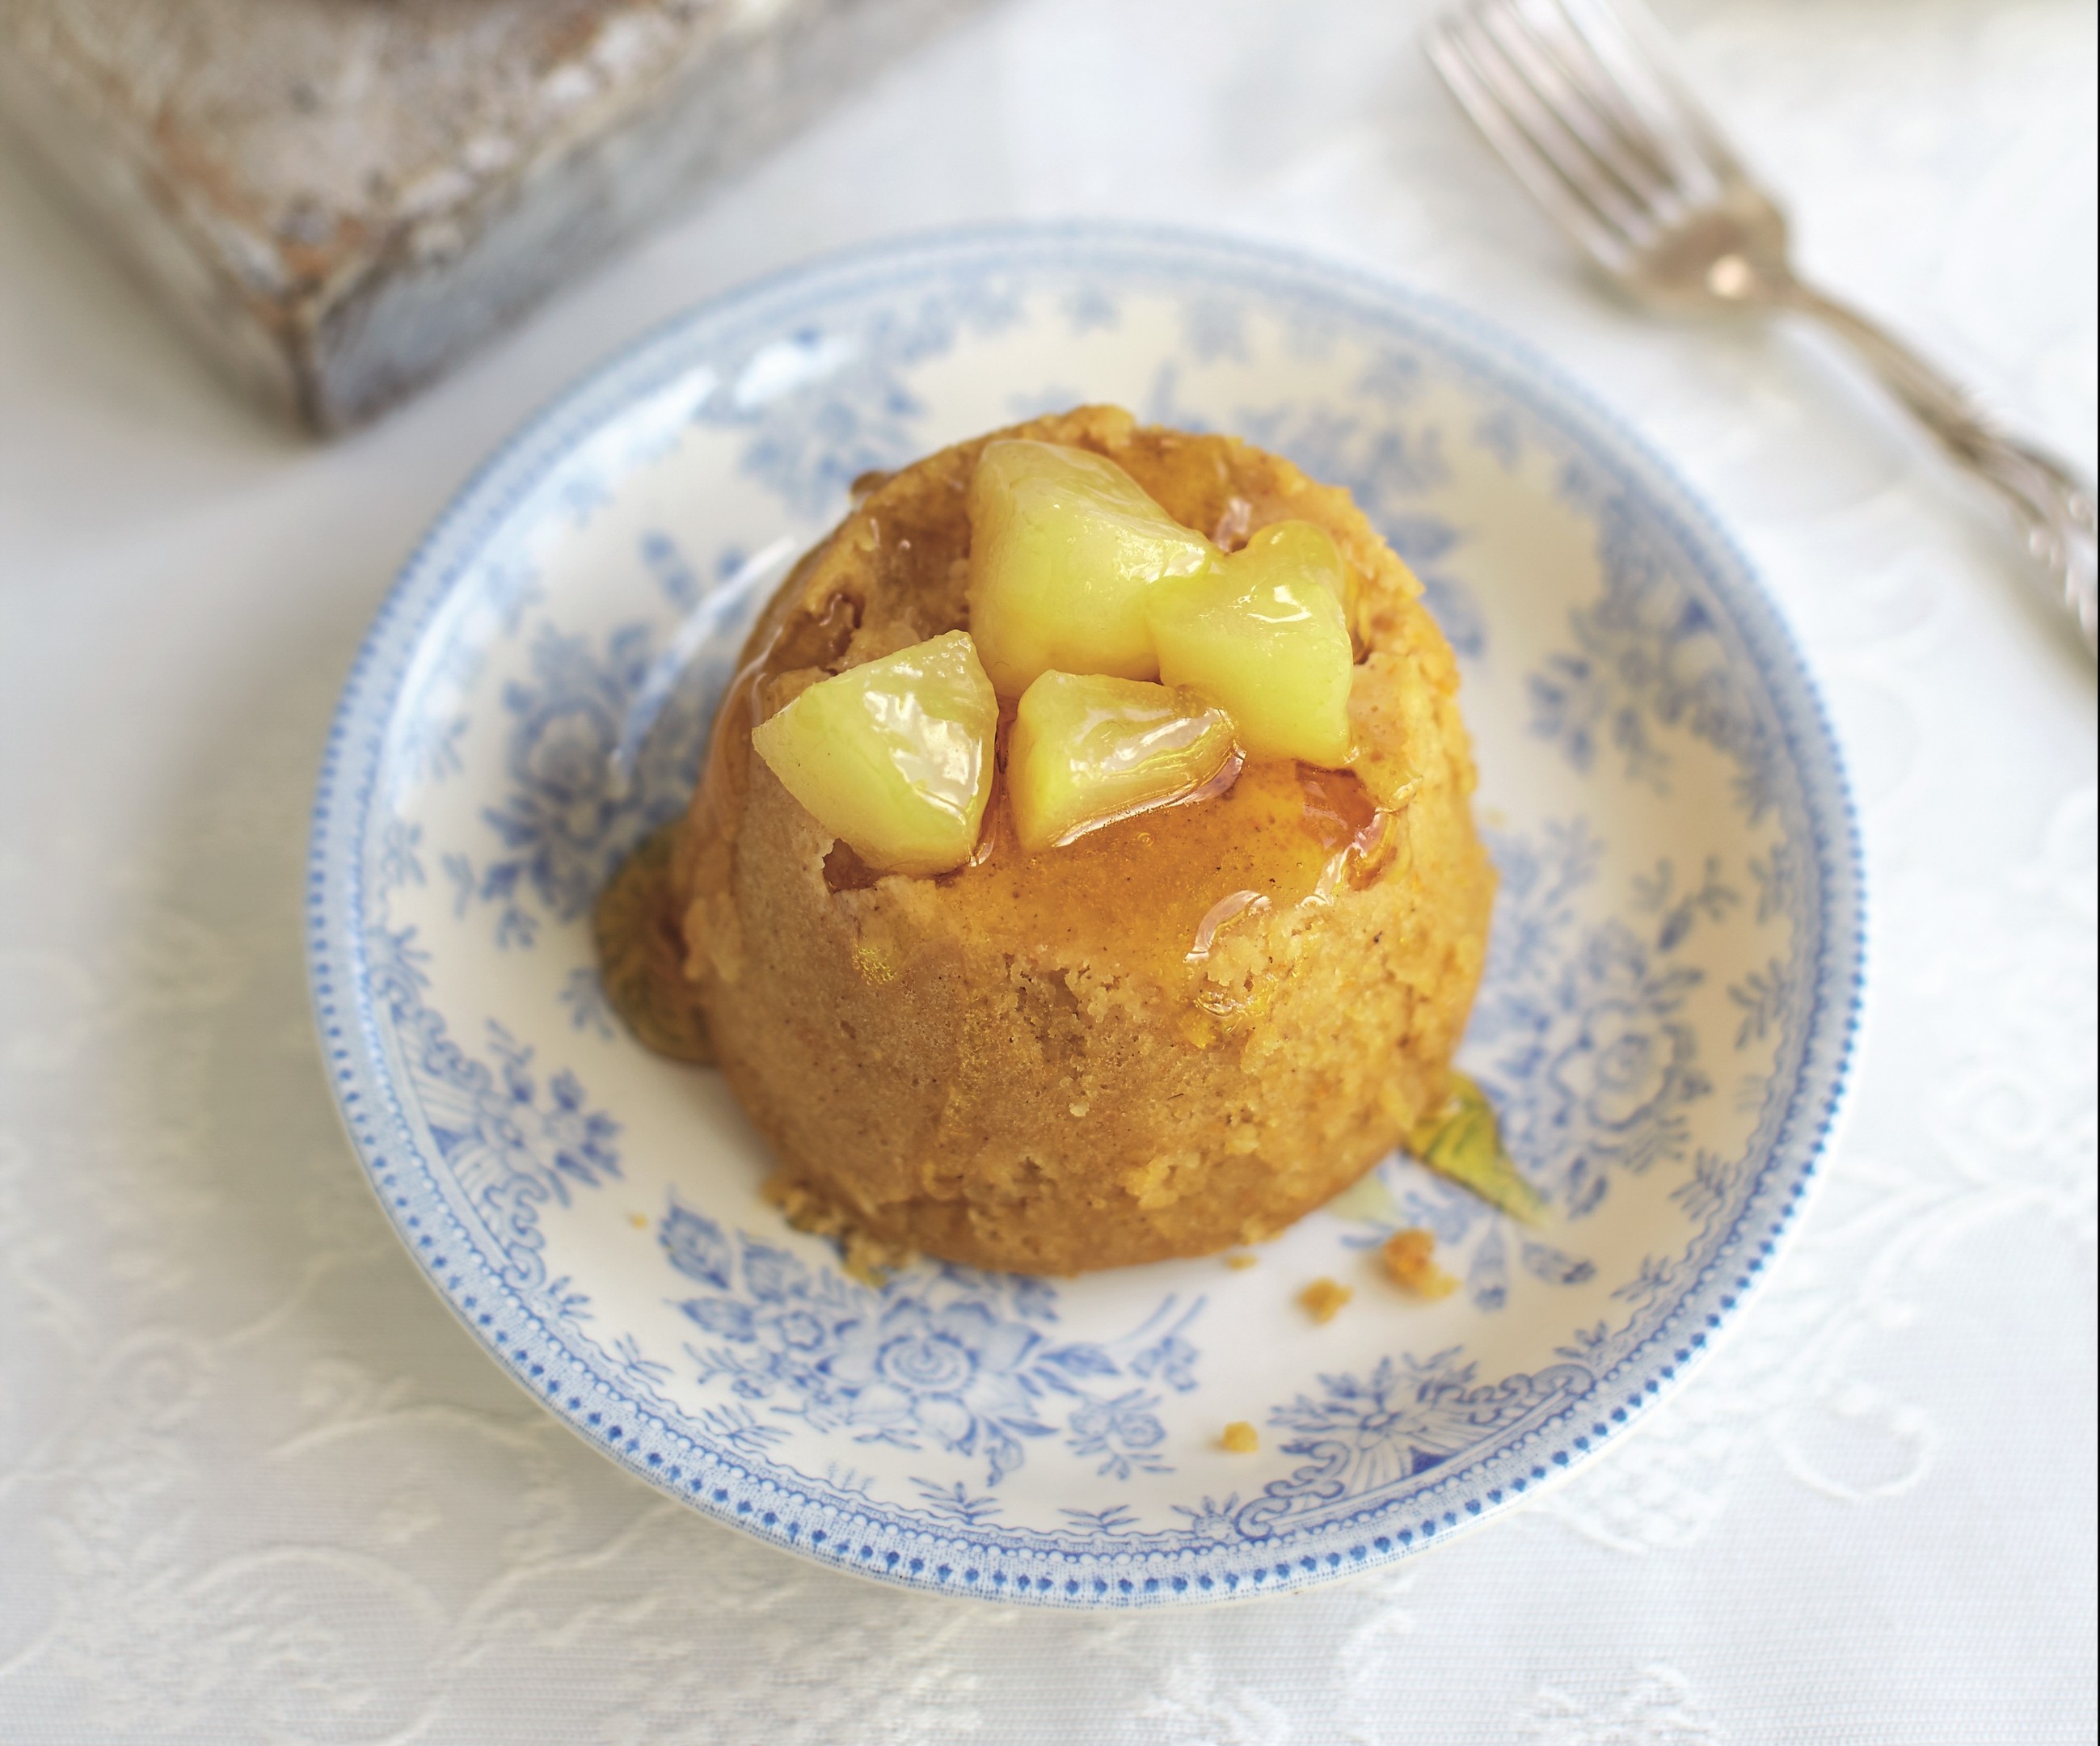 Upside-down pudding from the recipe book Puddings, by Johnny Shepherd